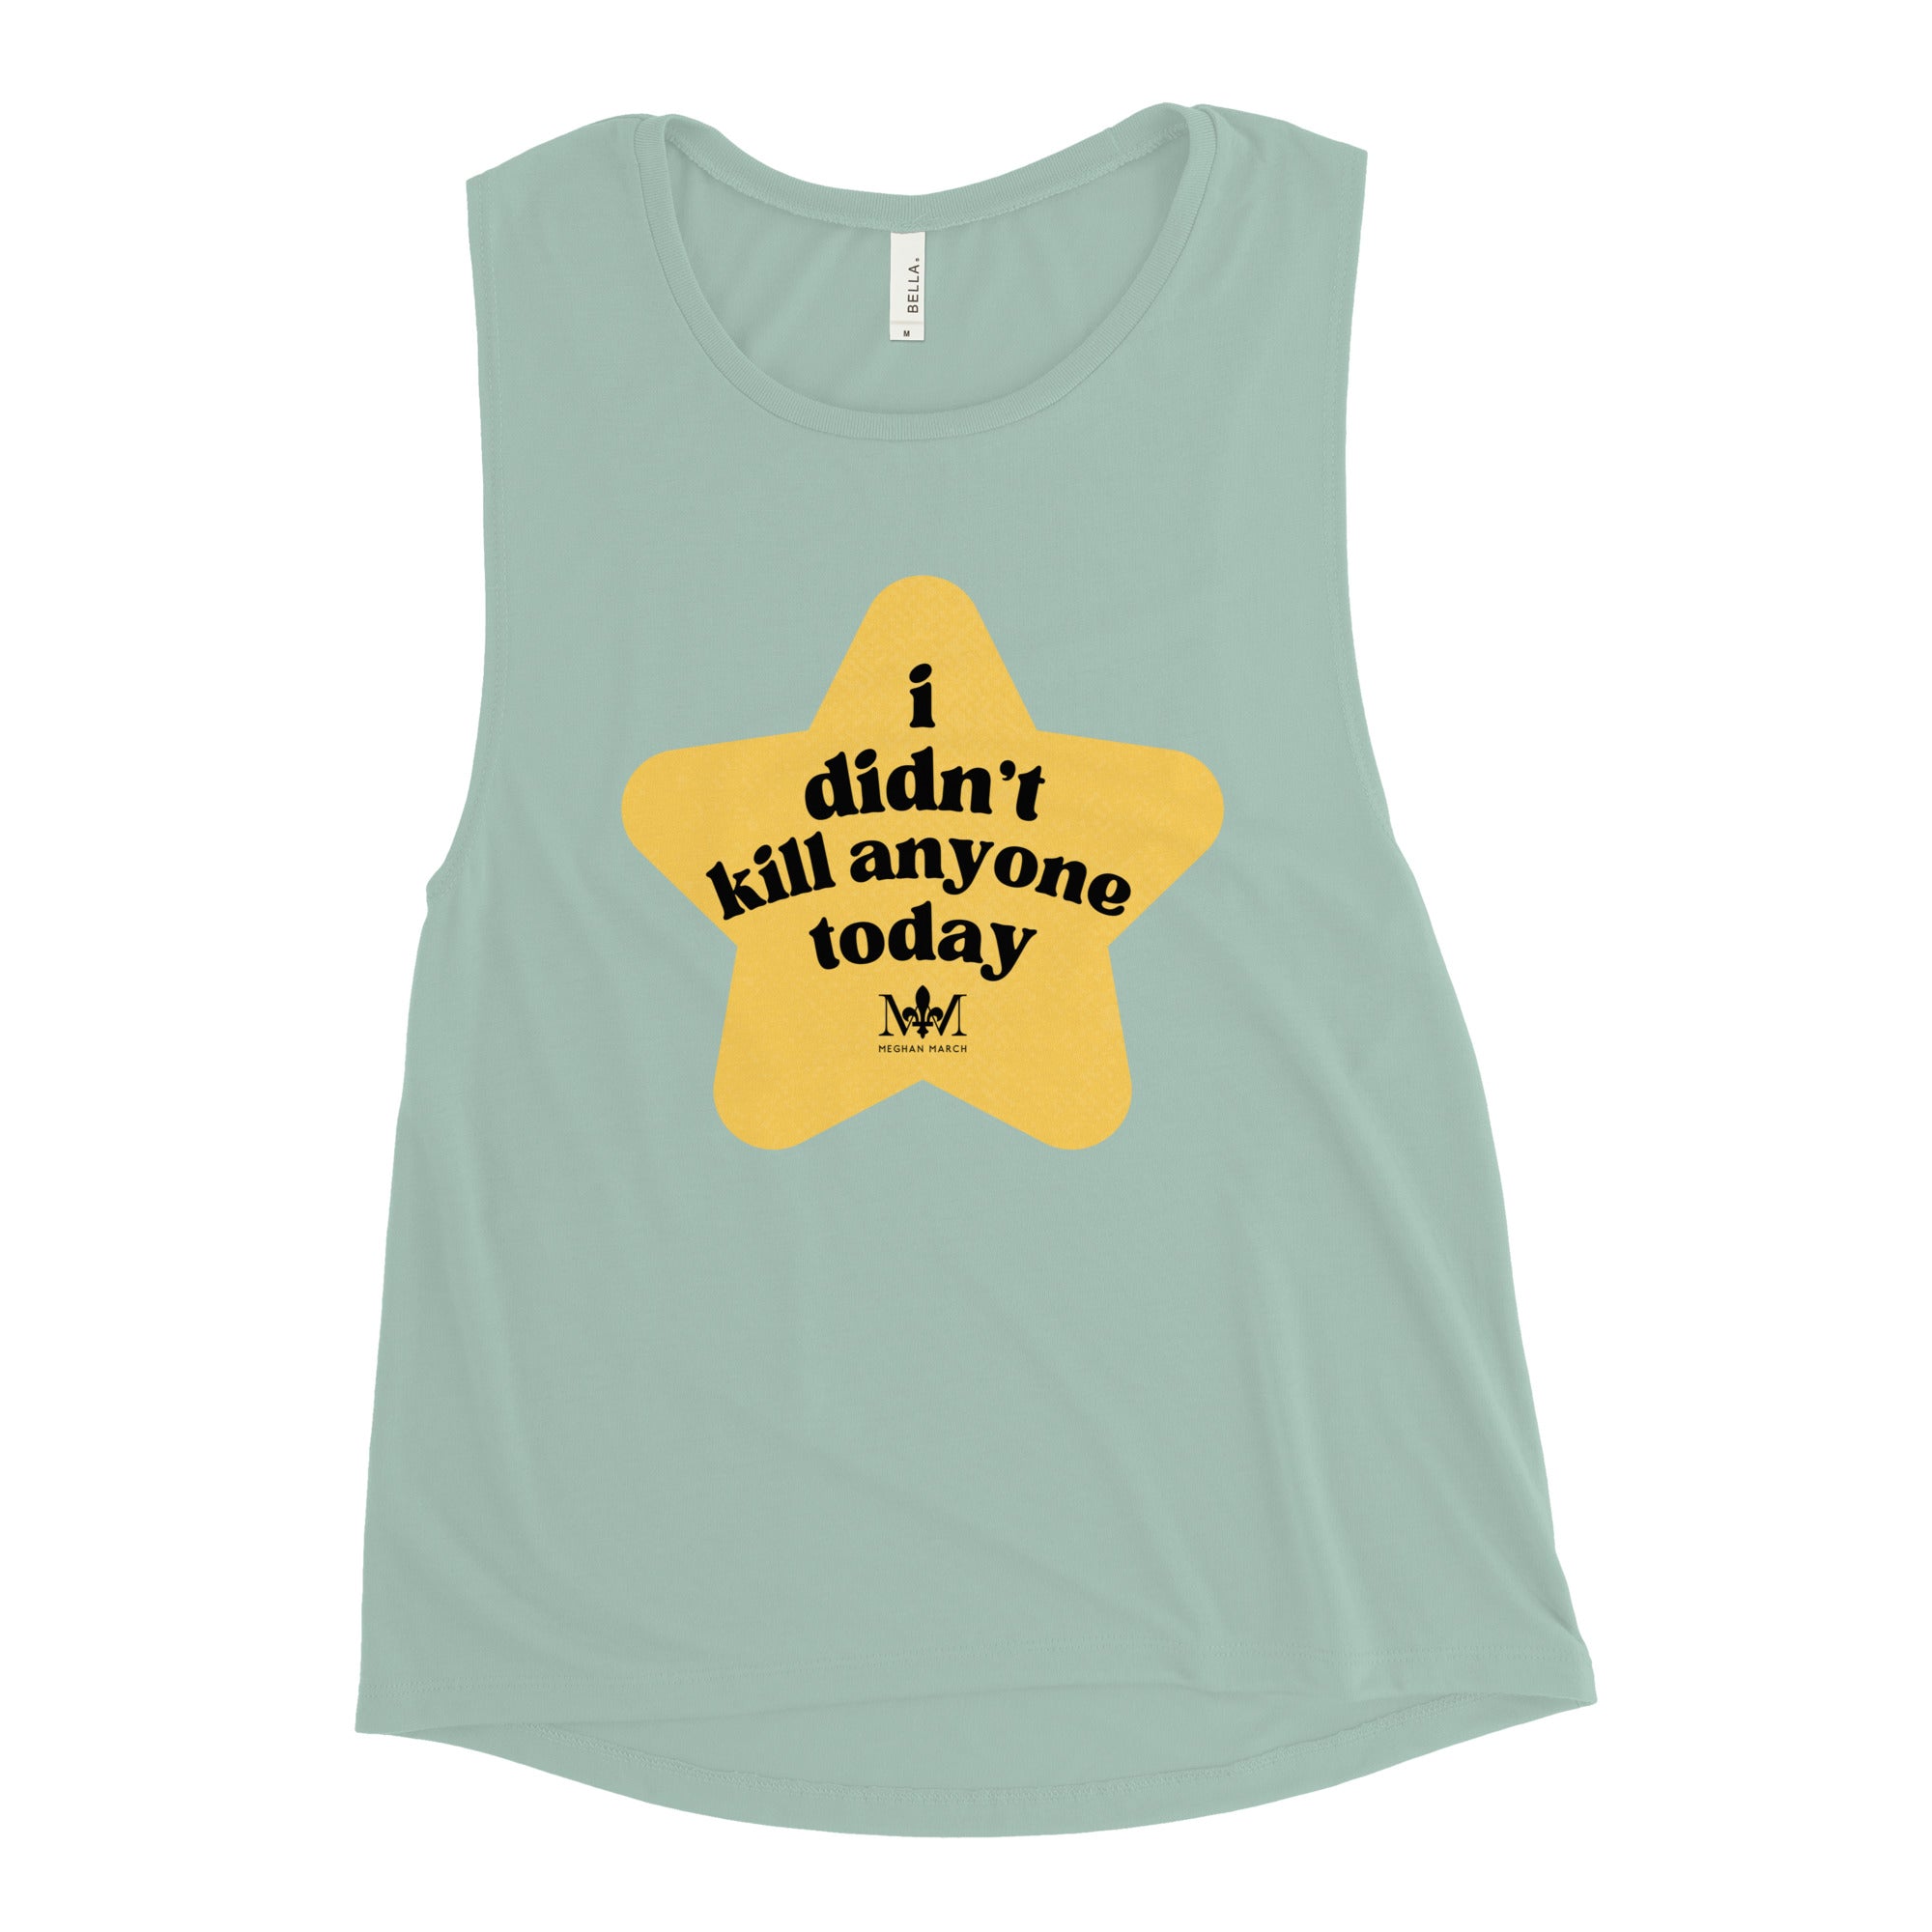 Gold Star Ladies’ Muscle Tank